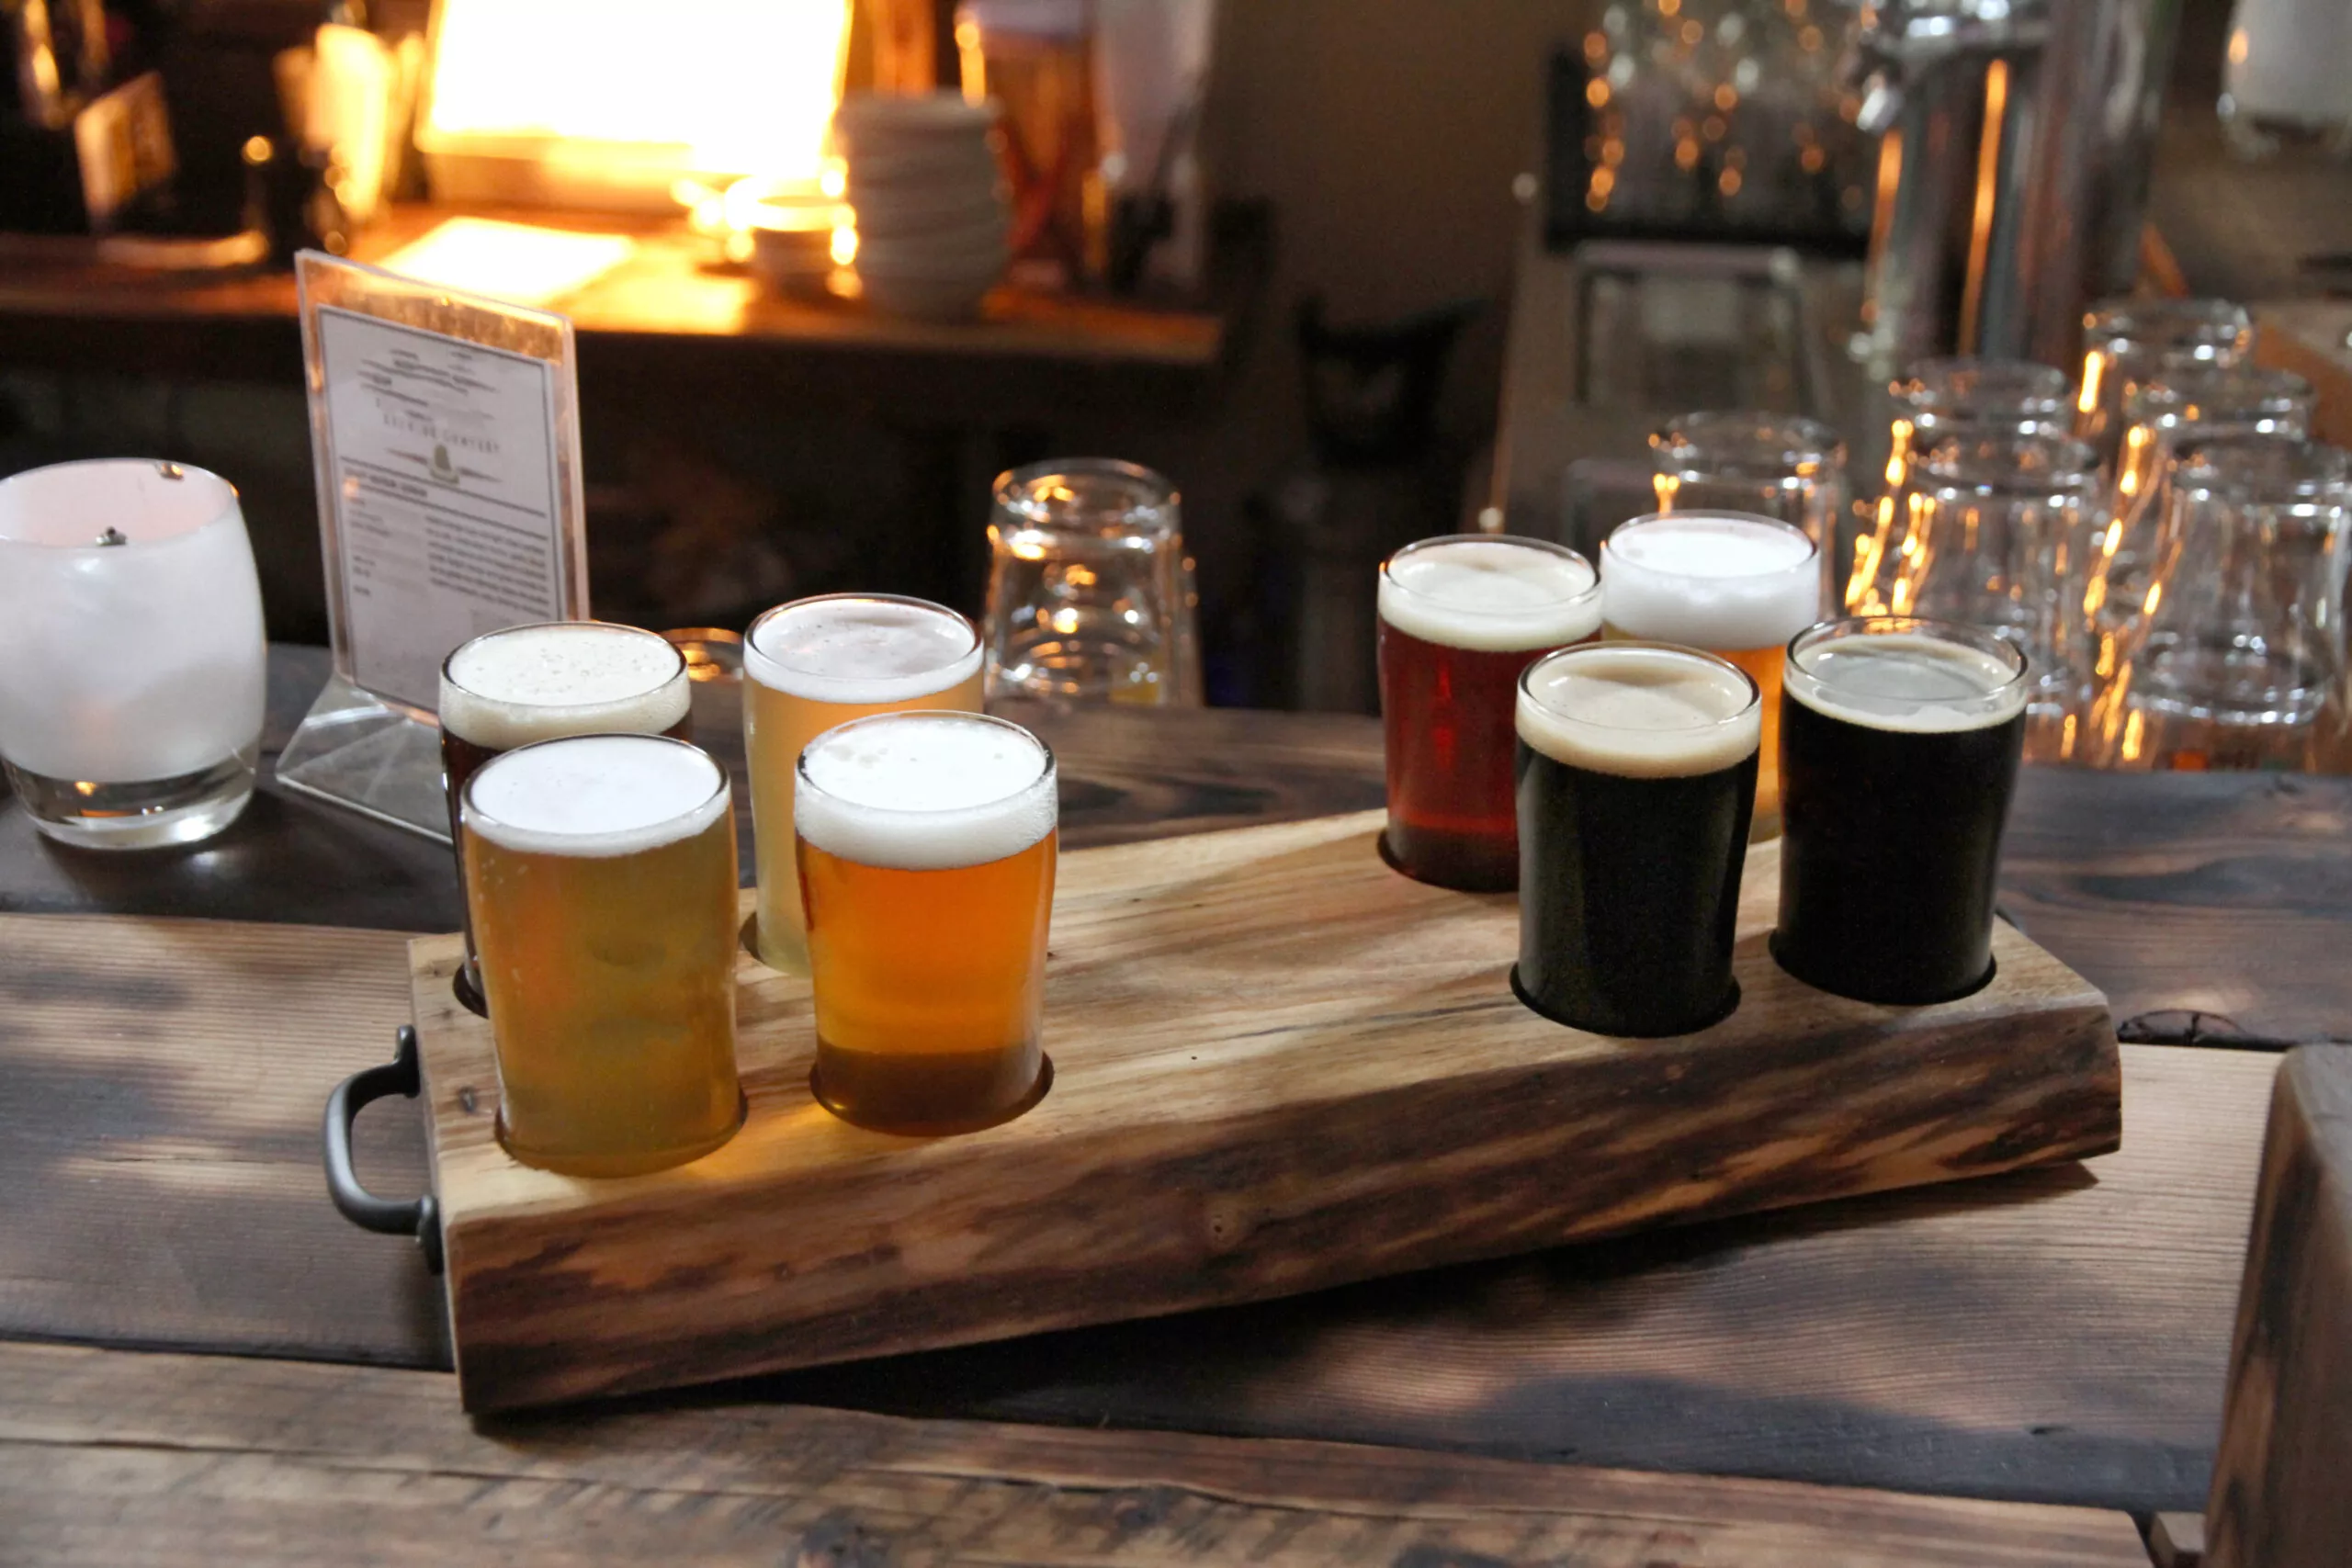 Beer Samples in a Wood Themed Room